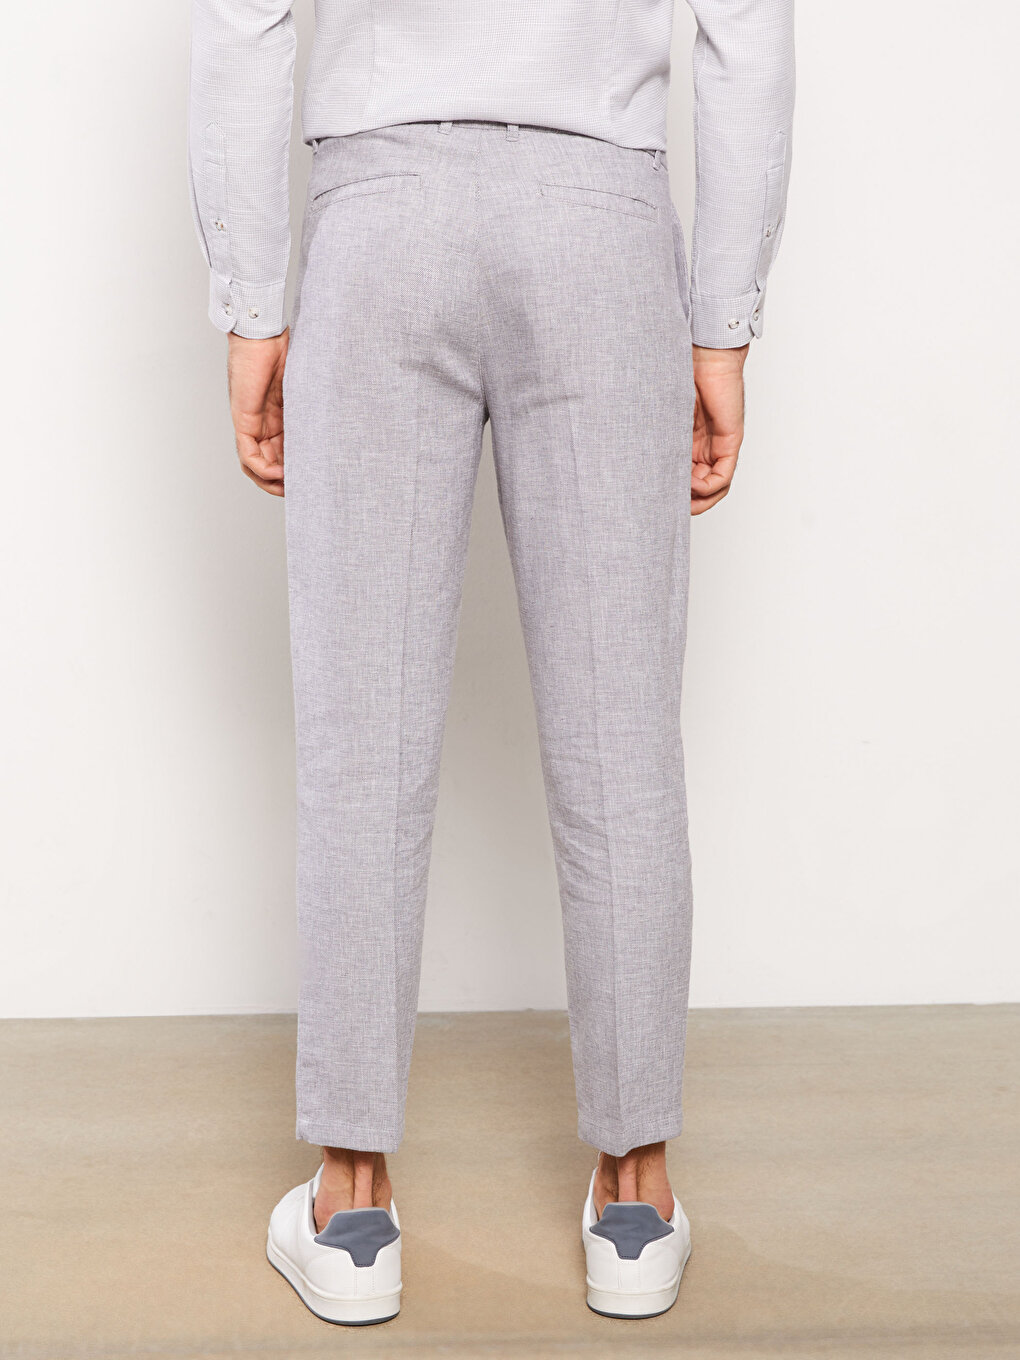 Incotex Tailored Cropped Trousers - Farfetch